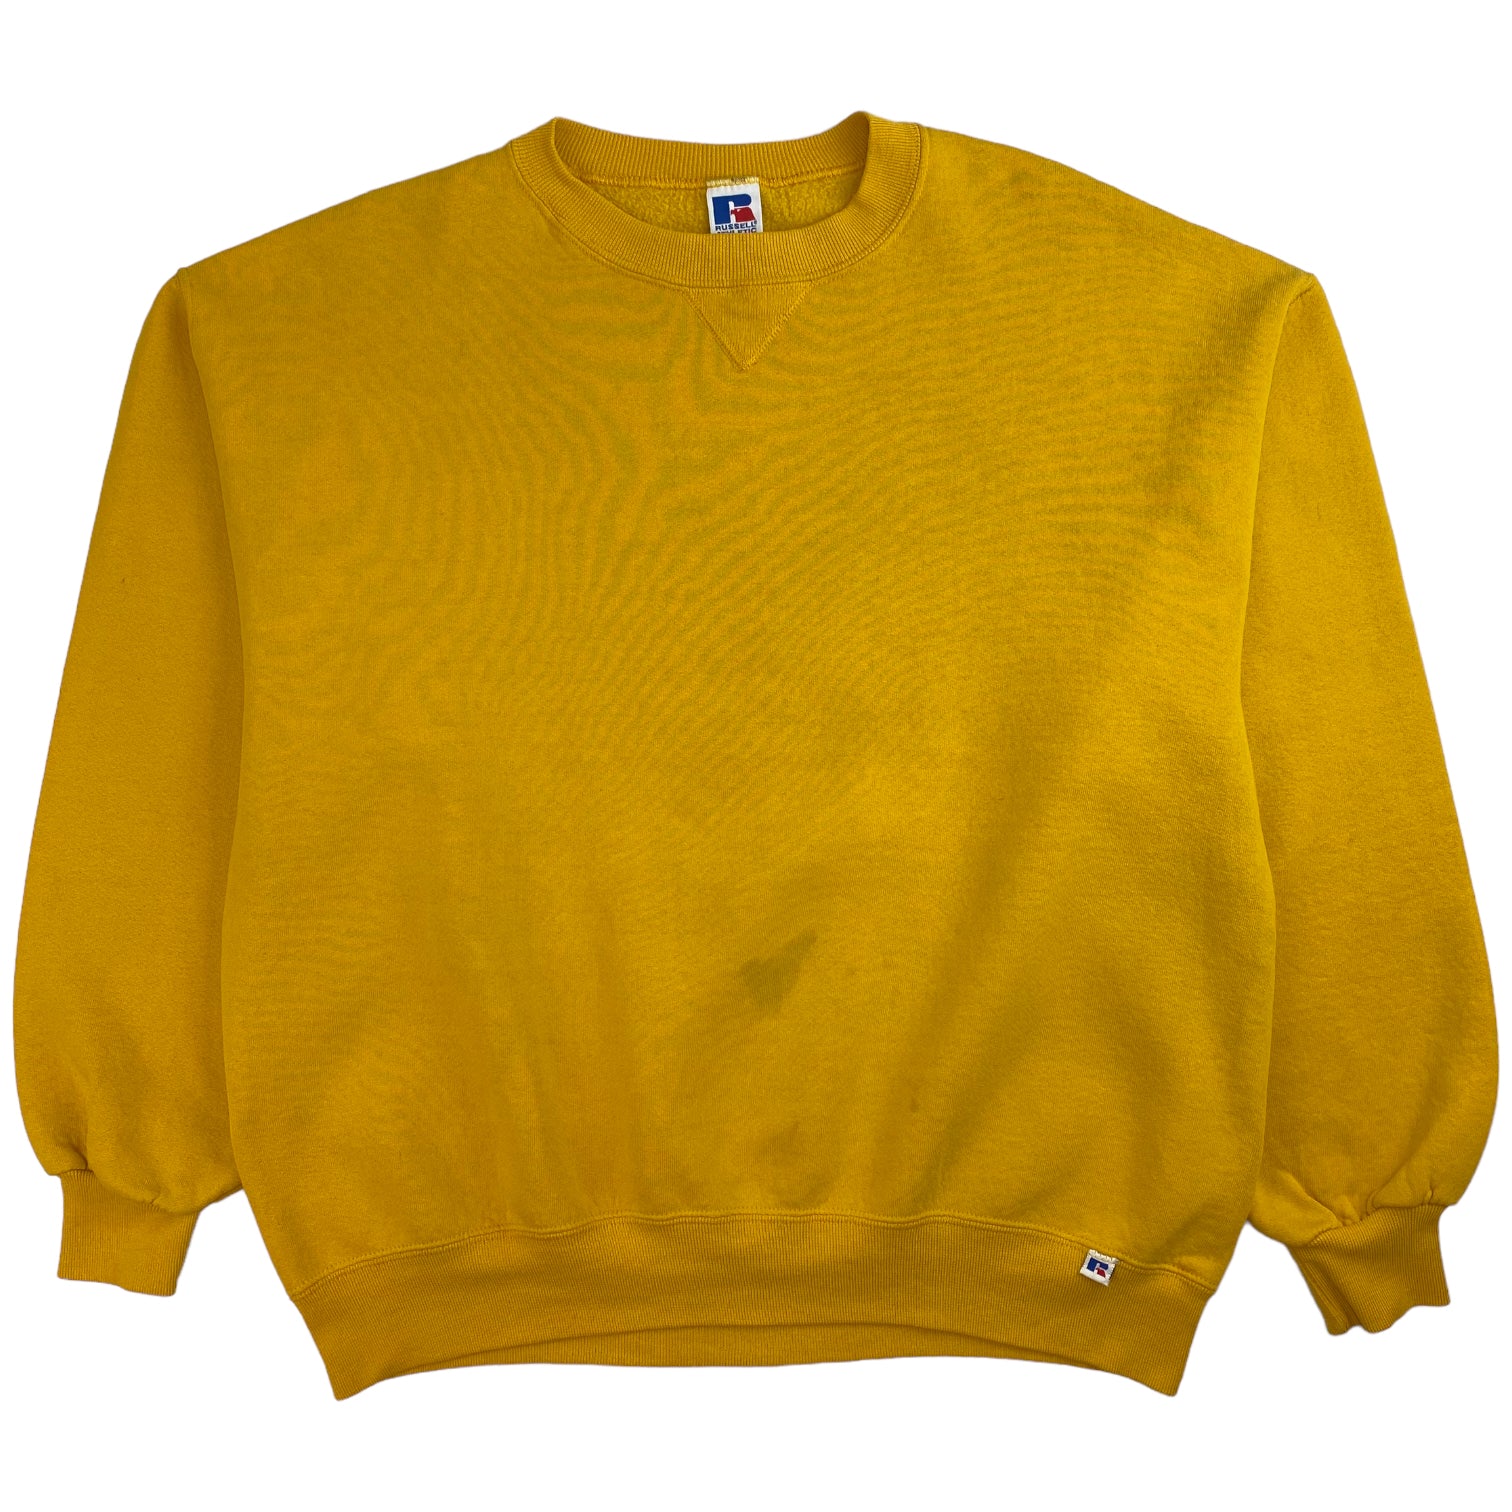 Vintage Russell Athletic Blank Crewneck Yellow